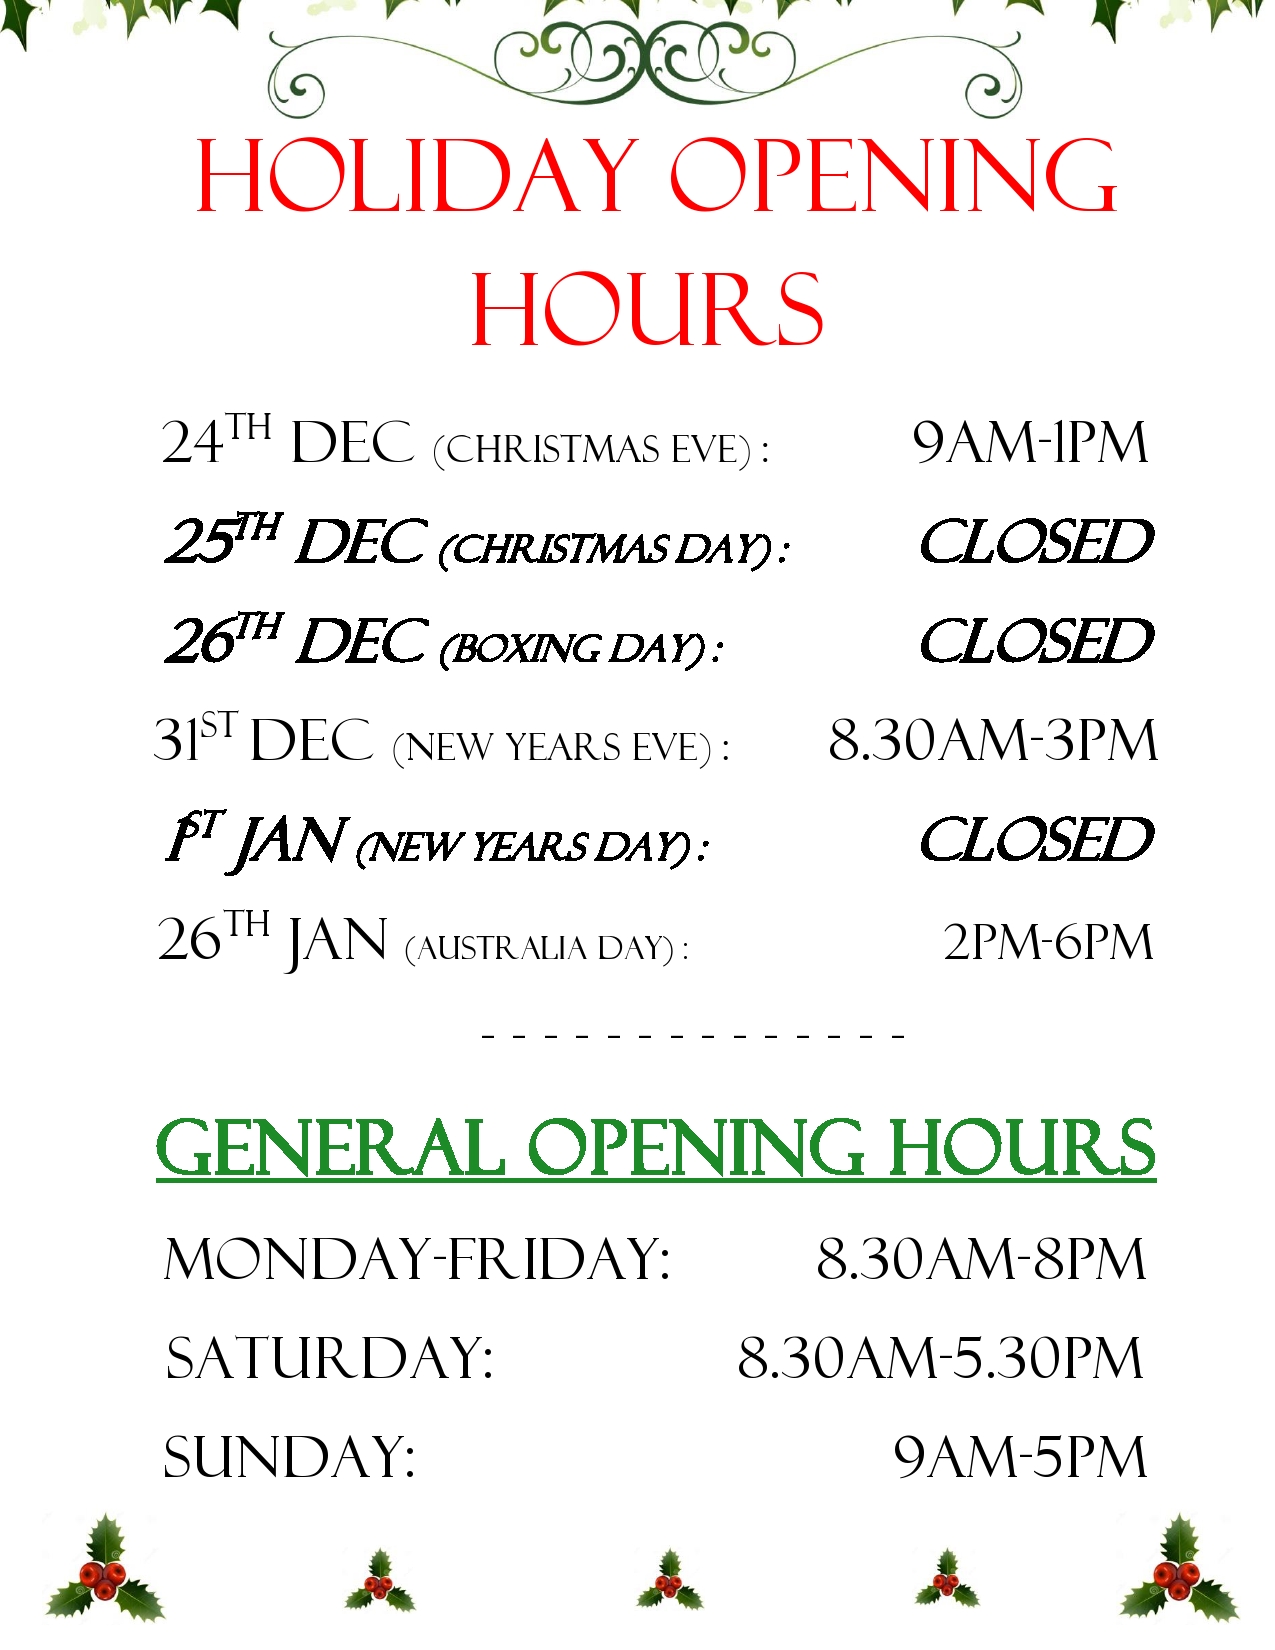 Holiday Opening Hours – December 2015 and January 2016